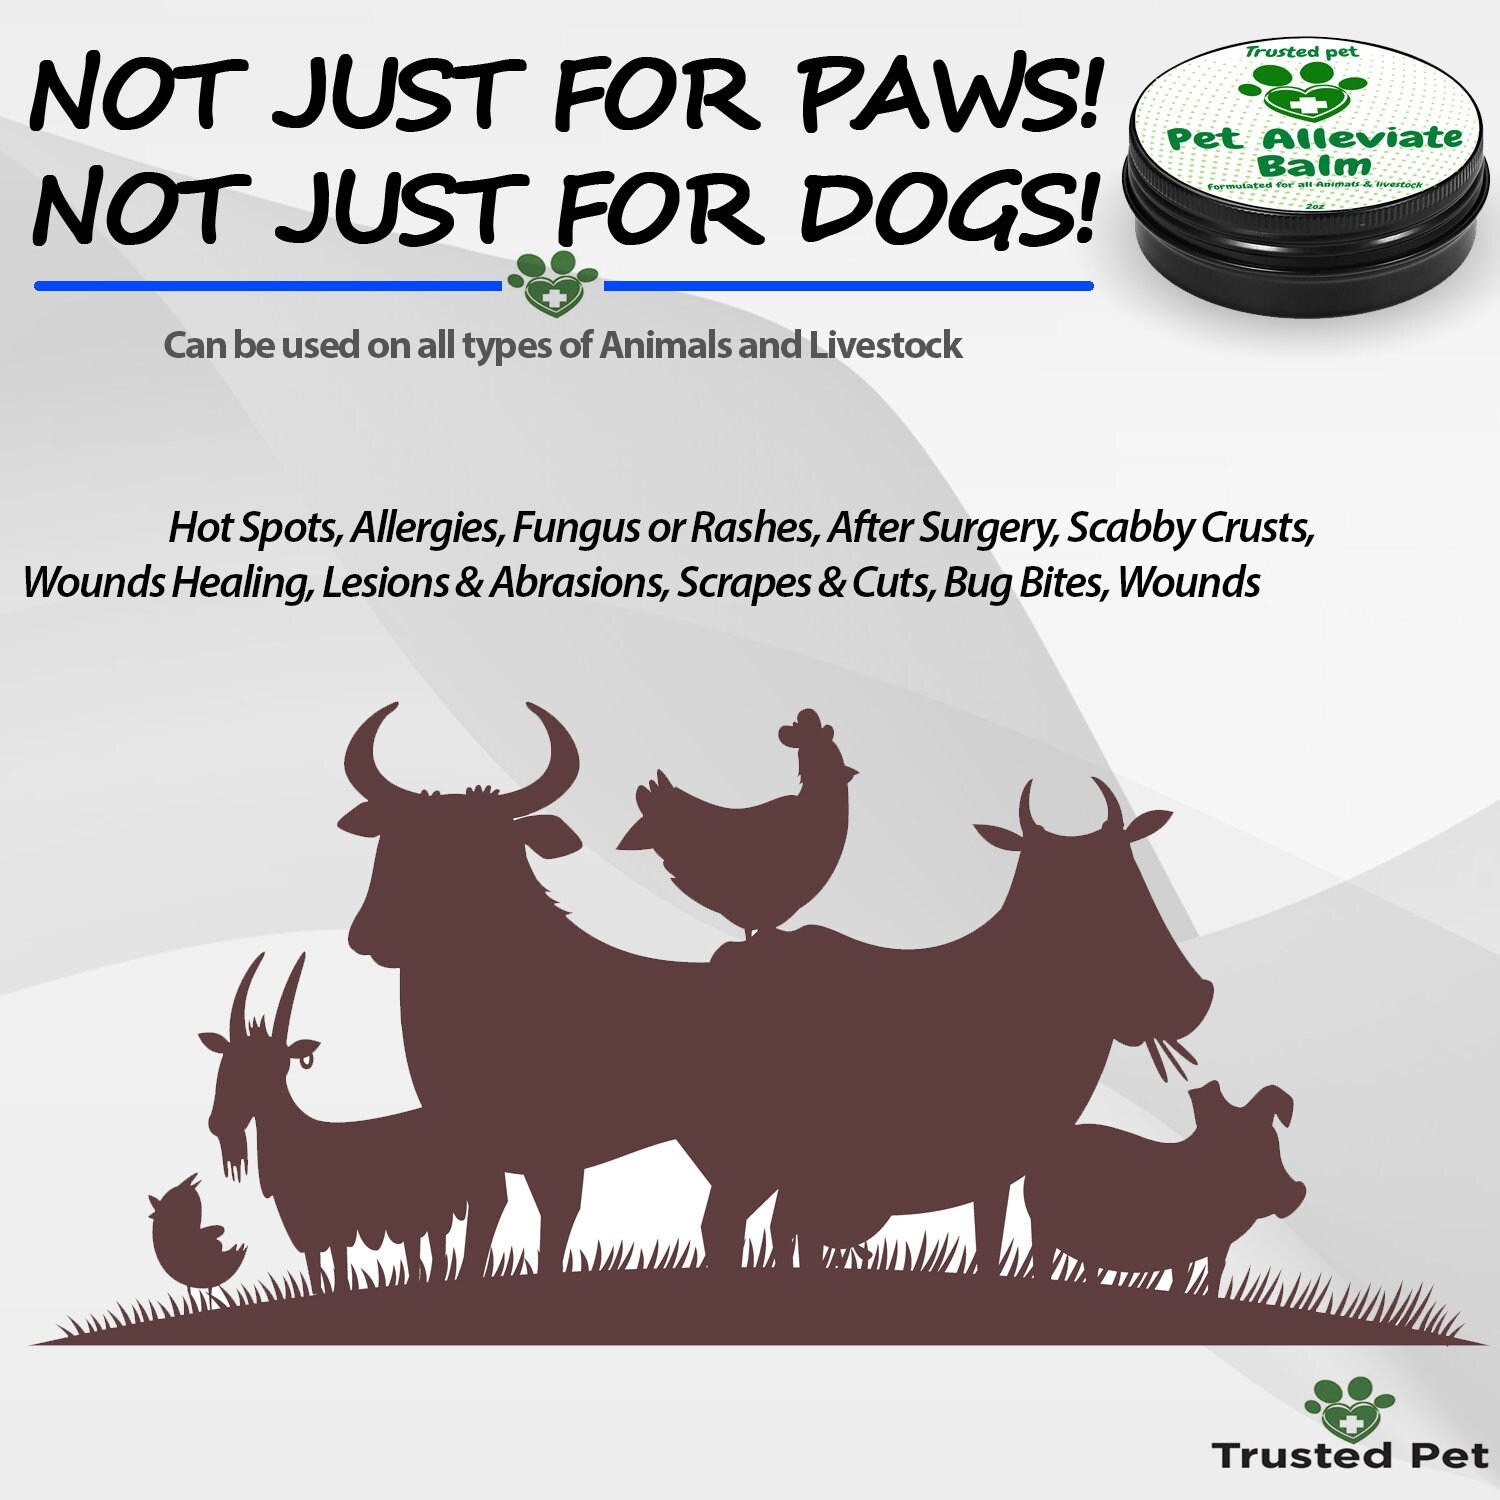 2 oz Nose Balm 100% Natural Paw Soother for Dogs and Cats Coconut Oil Trusted pet Paw Balm & Dog Elbow Protector with Beeswax Paw Pad Moisturizer Vitamin E 